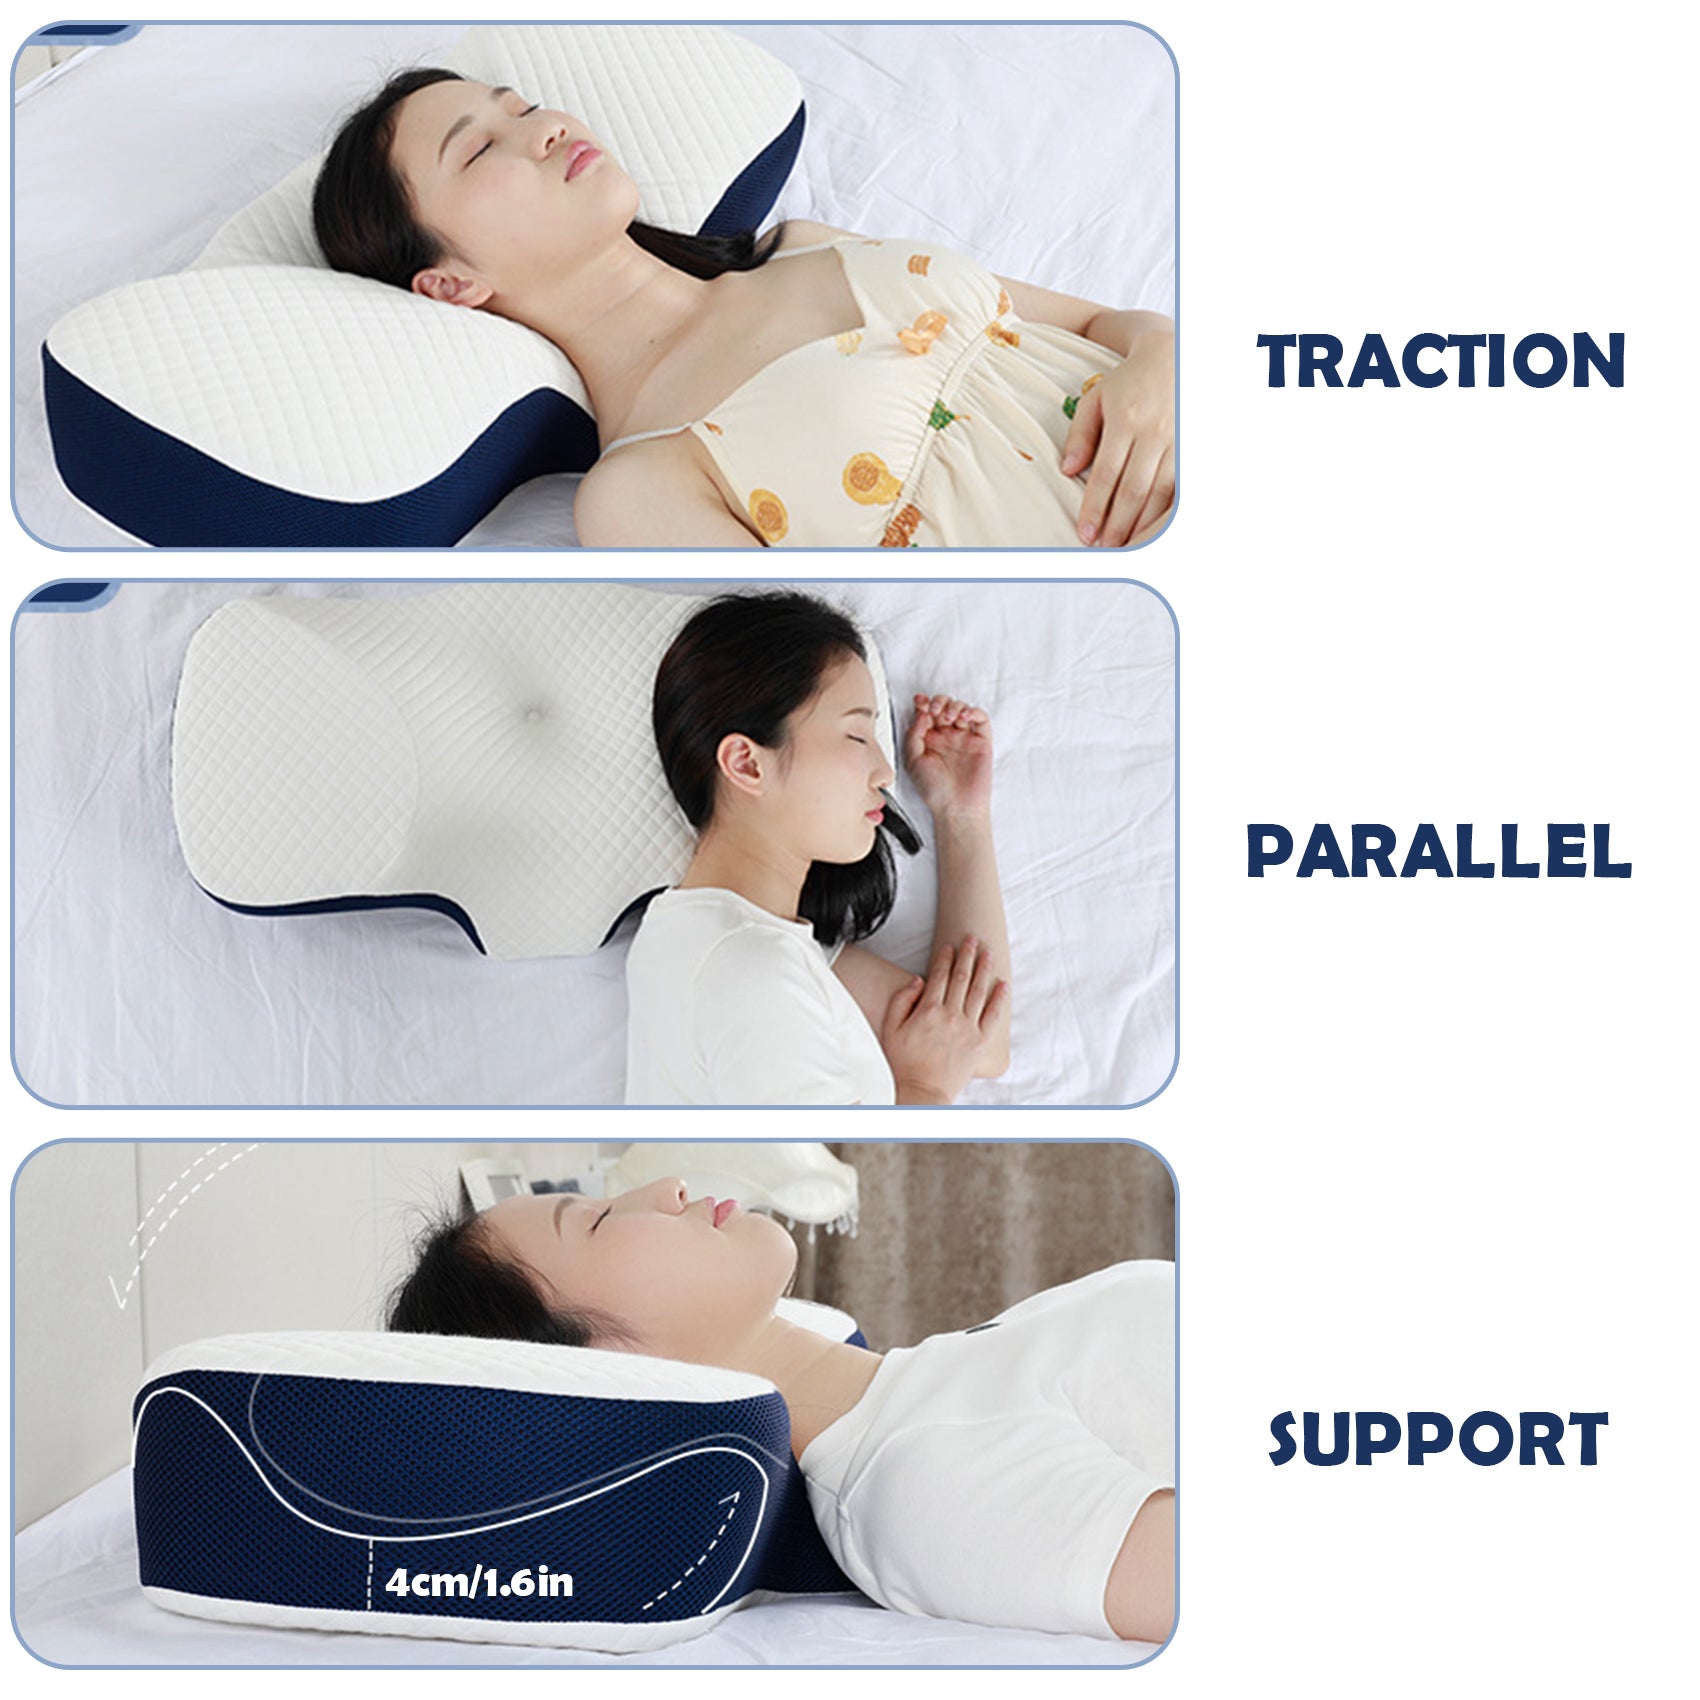 Contour Memory Foam Pillow with Washable Silk-Pillowcase Orthopedic Ergonomic Cervical Sleeping Pillow for Neck Shoulder Pain for Side Back Stomach Sleepers